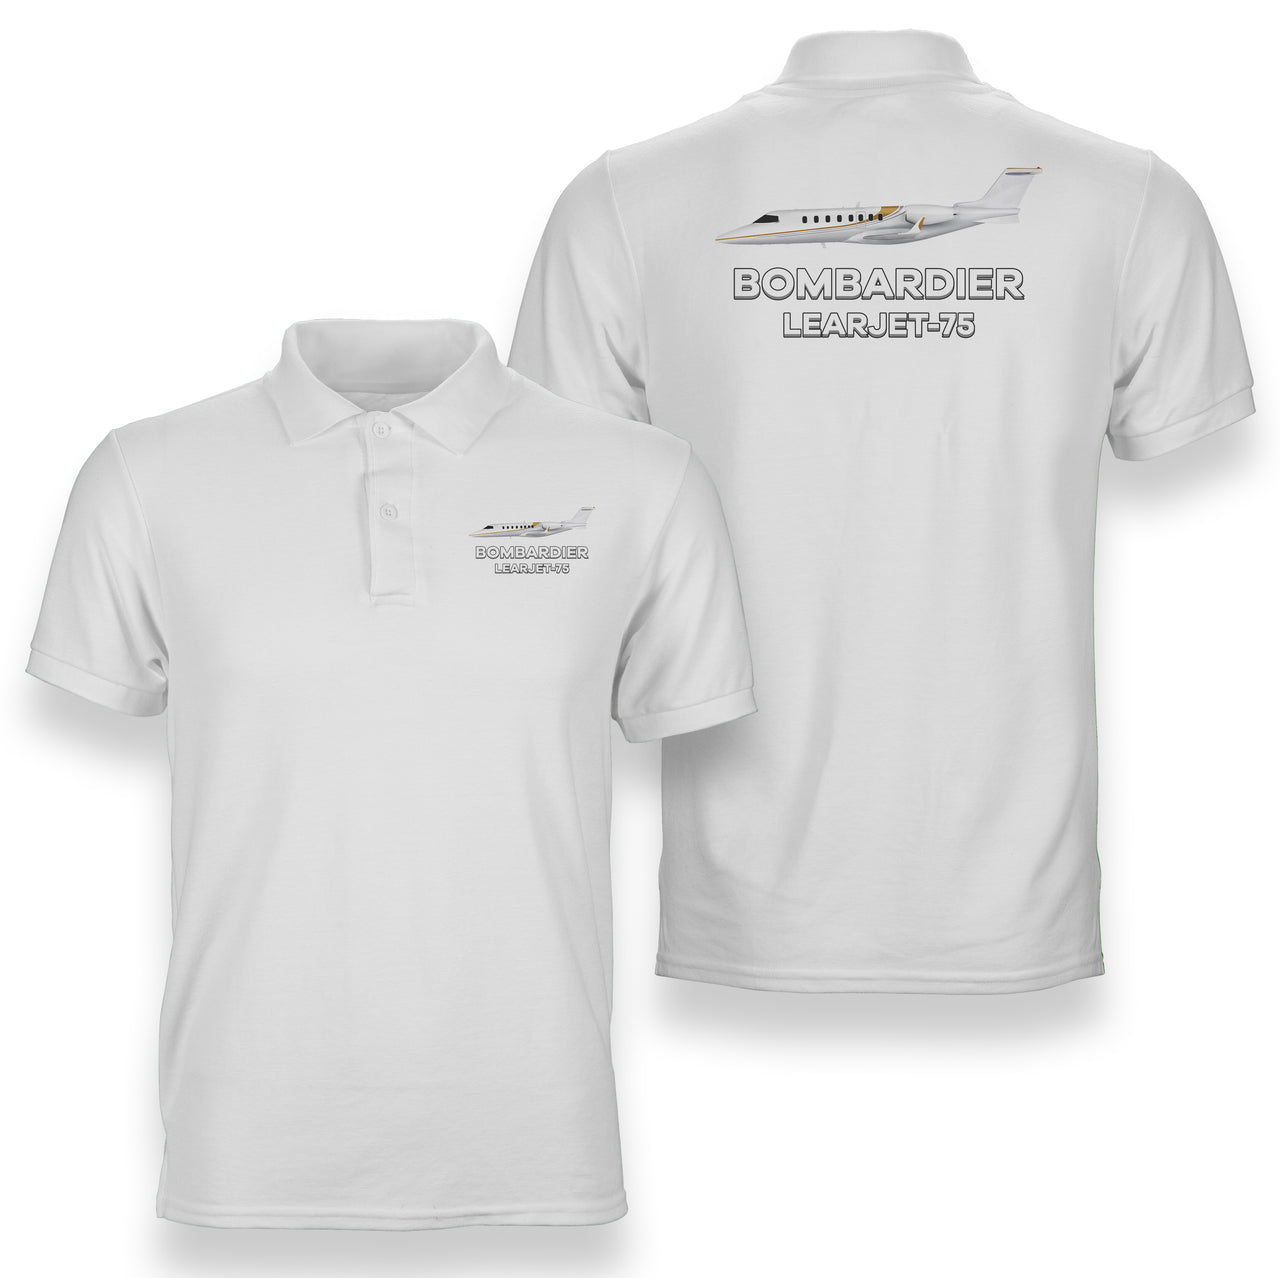 The Bombardier Learjet 75 Designed Double Side Polo T-Shirts